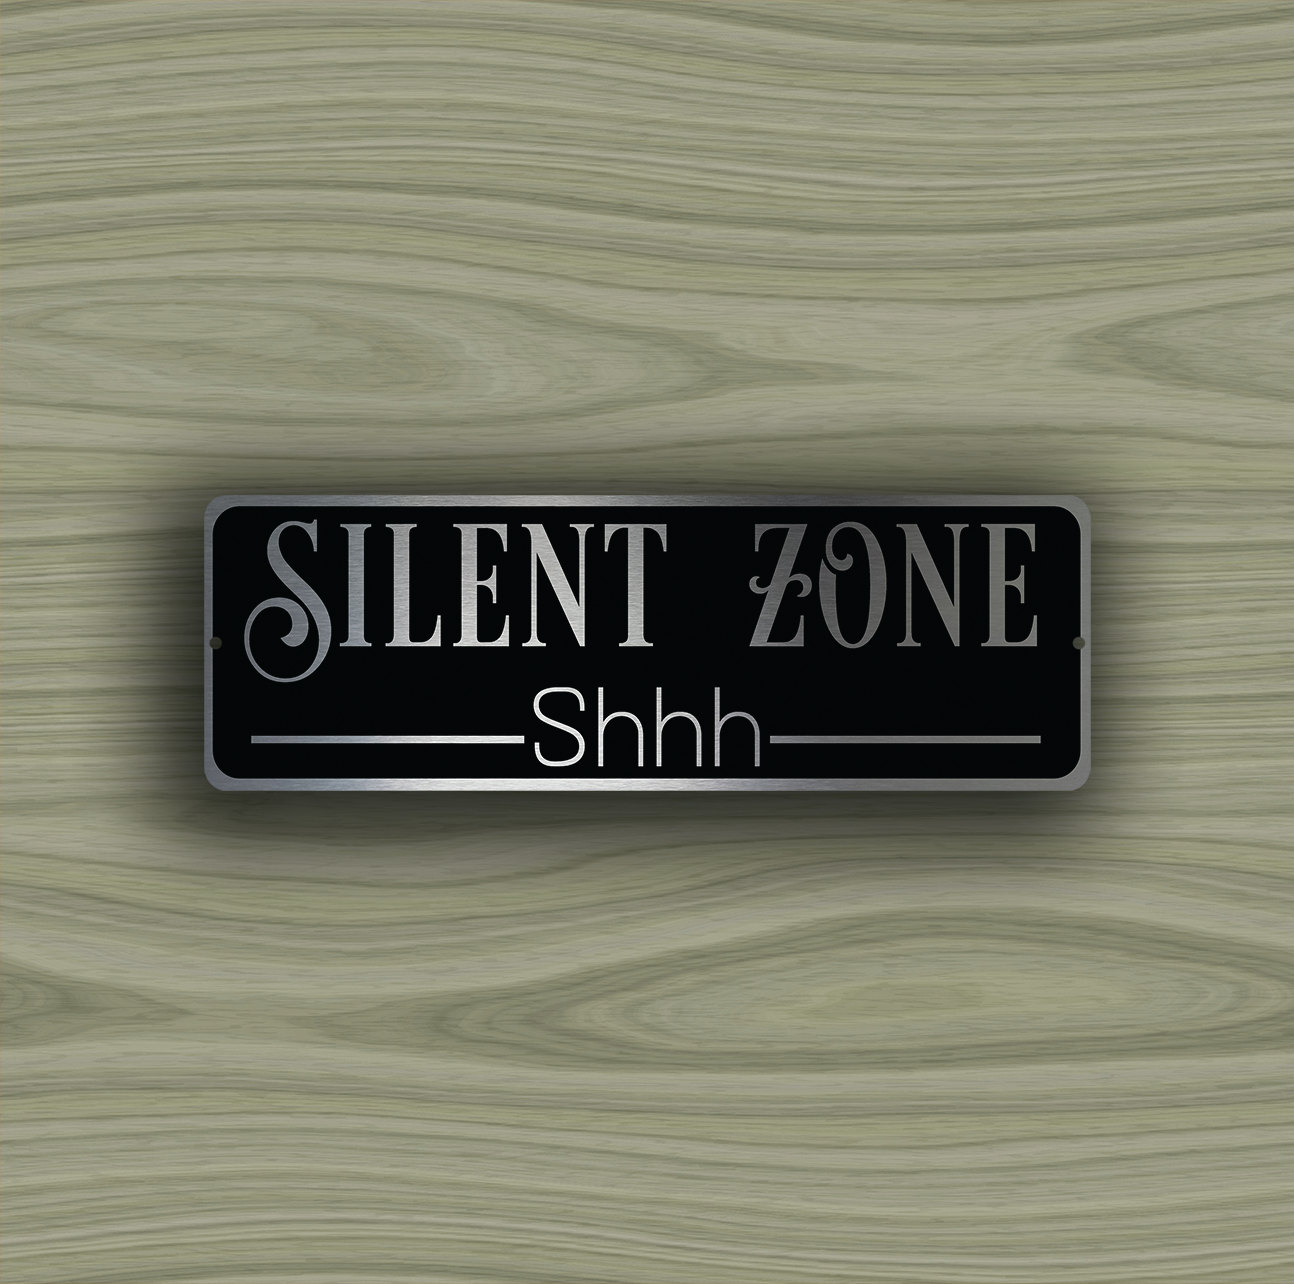 SILENT ZONE SIGN